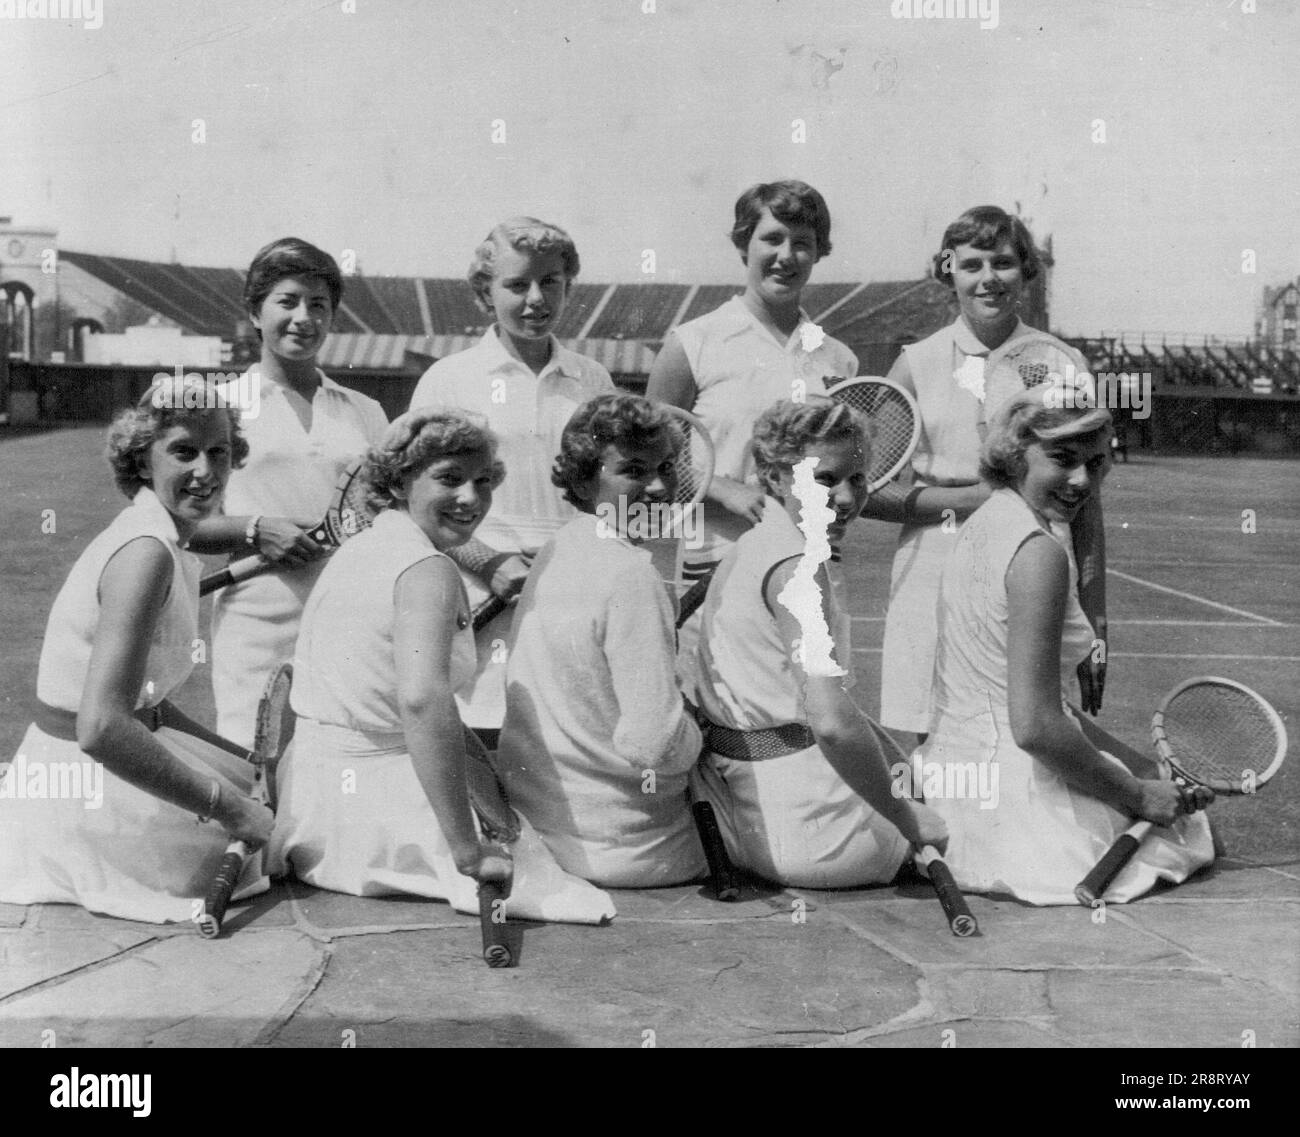 Tennis Hopefuls -- Members of the National Junior Wightman Cup squad pose for team picture at West Side Tennis Club here yesterday. Left to right (front) are Marry Ann Eilenberger of San Diego, Calif.; Darlene Hard of Montebello, Calif.; Mary Slaughter of Charlottesville, Va.; Suzanne Her of Miami beach, Fla.; Karol Fageros of Coral Gables, Fla.; (rear) Susan Bralower of White Plains, N.Y.; Jean Laird of Modesto, Calif.; Pat Stewart of Indianapolis, Ind., and Bonnie Mackay of Dayton, Ohio. August 31, 1953. (Photo by AP Wirephoto). Stock Photo